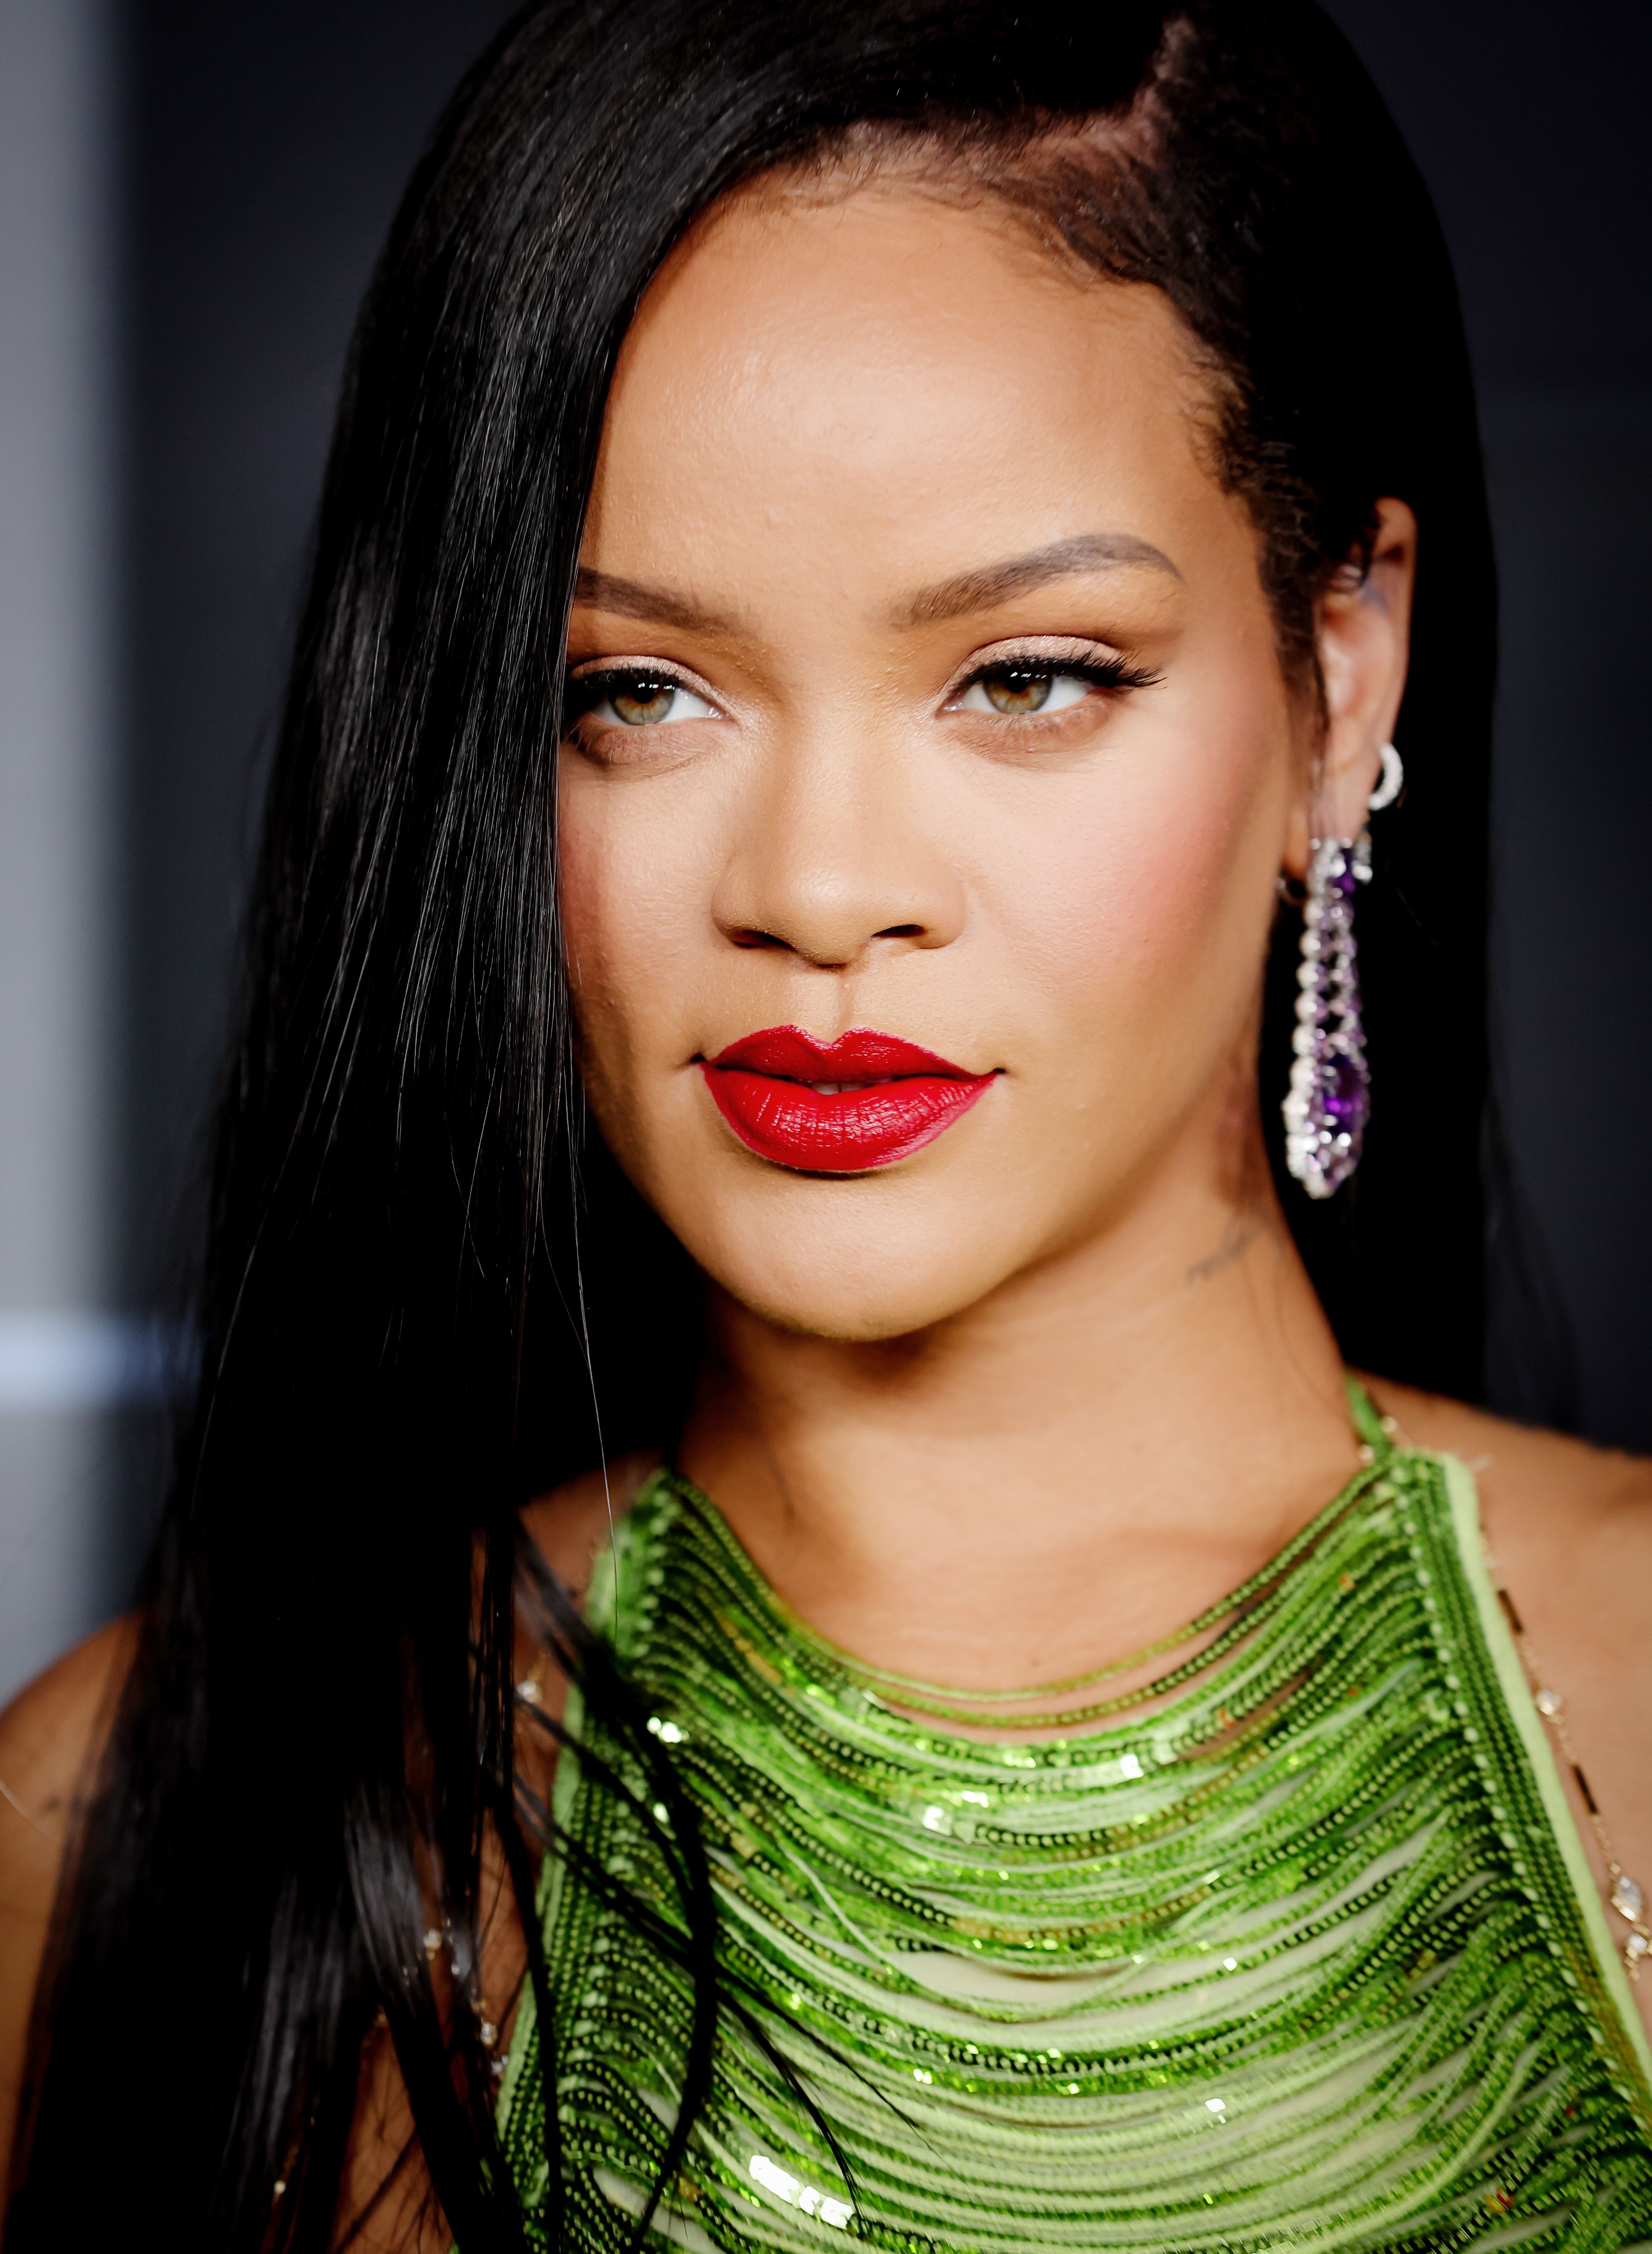 Now You Can Own Rihanna's Super Bowl Halftime Show Look